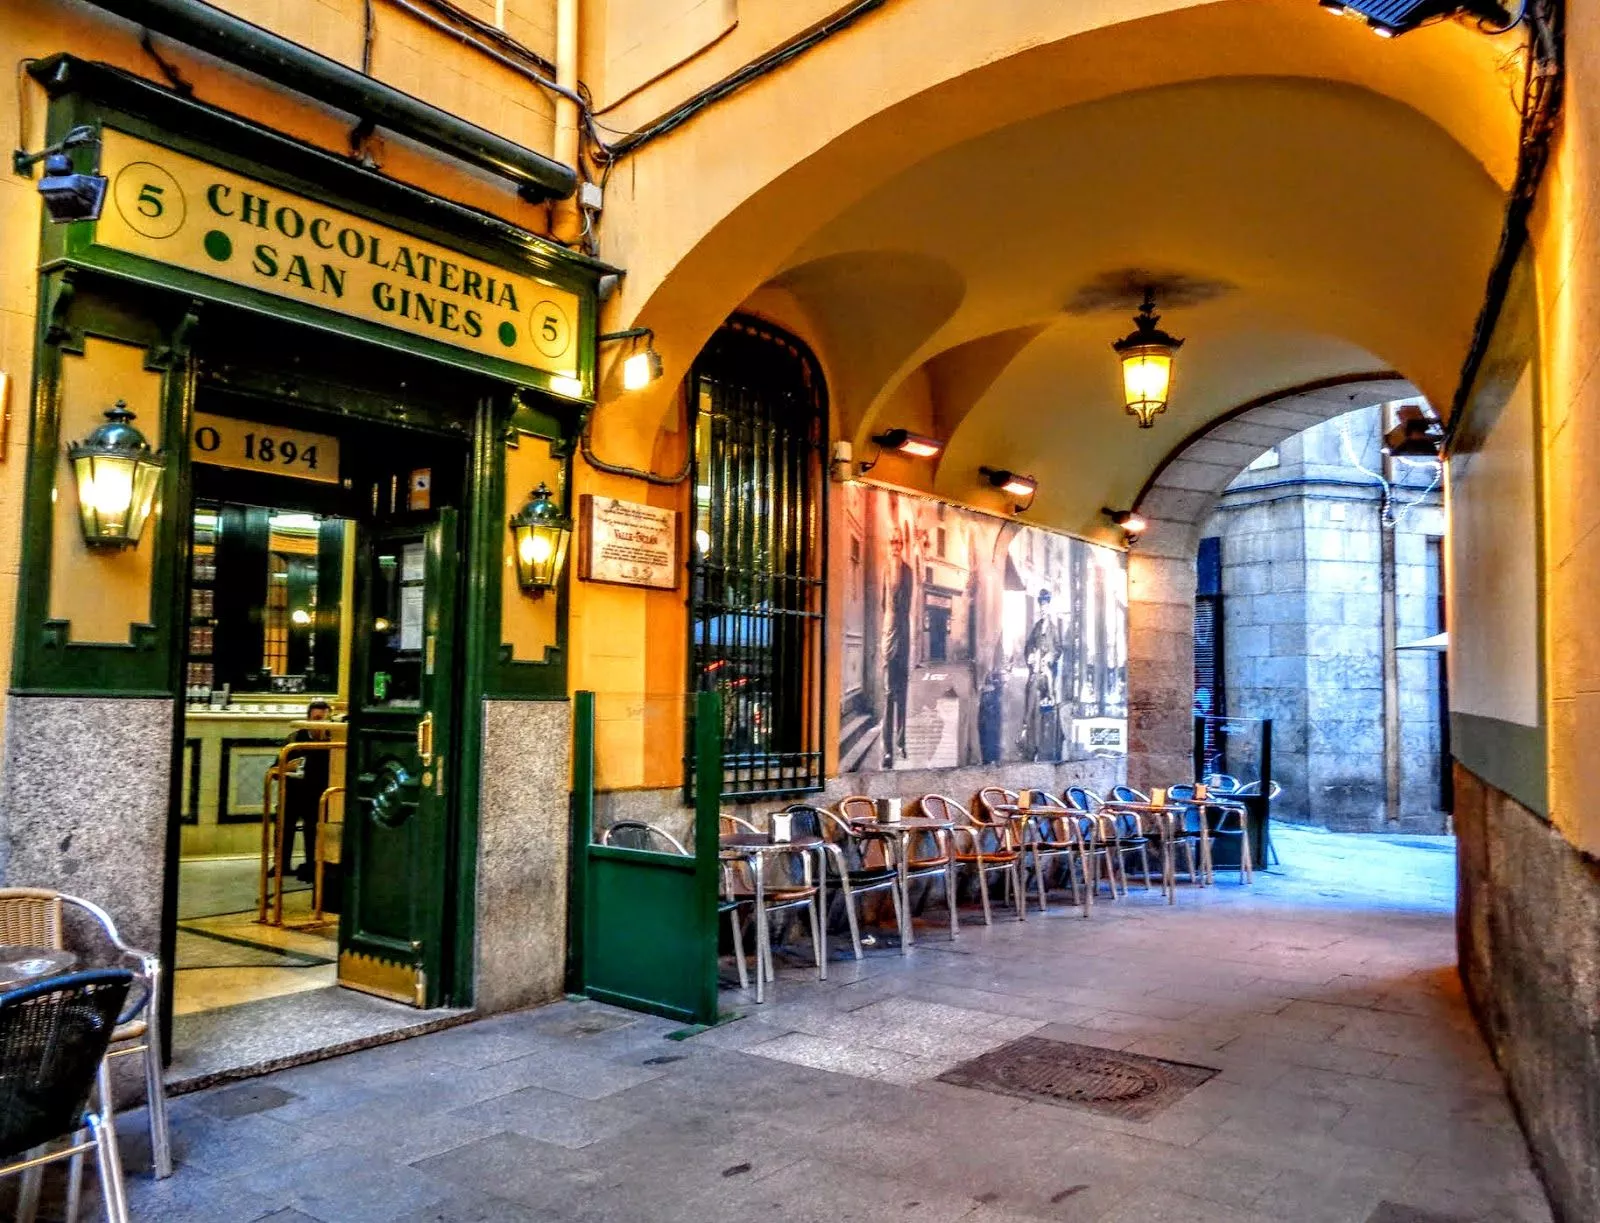 Chocolateria San Gines in Spain, Europe | Cafes - Rated 9